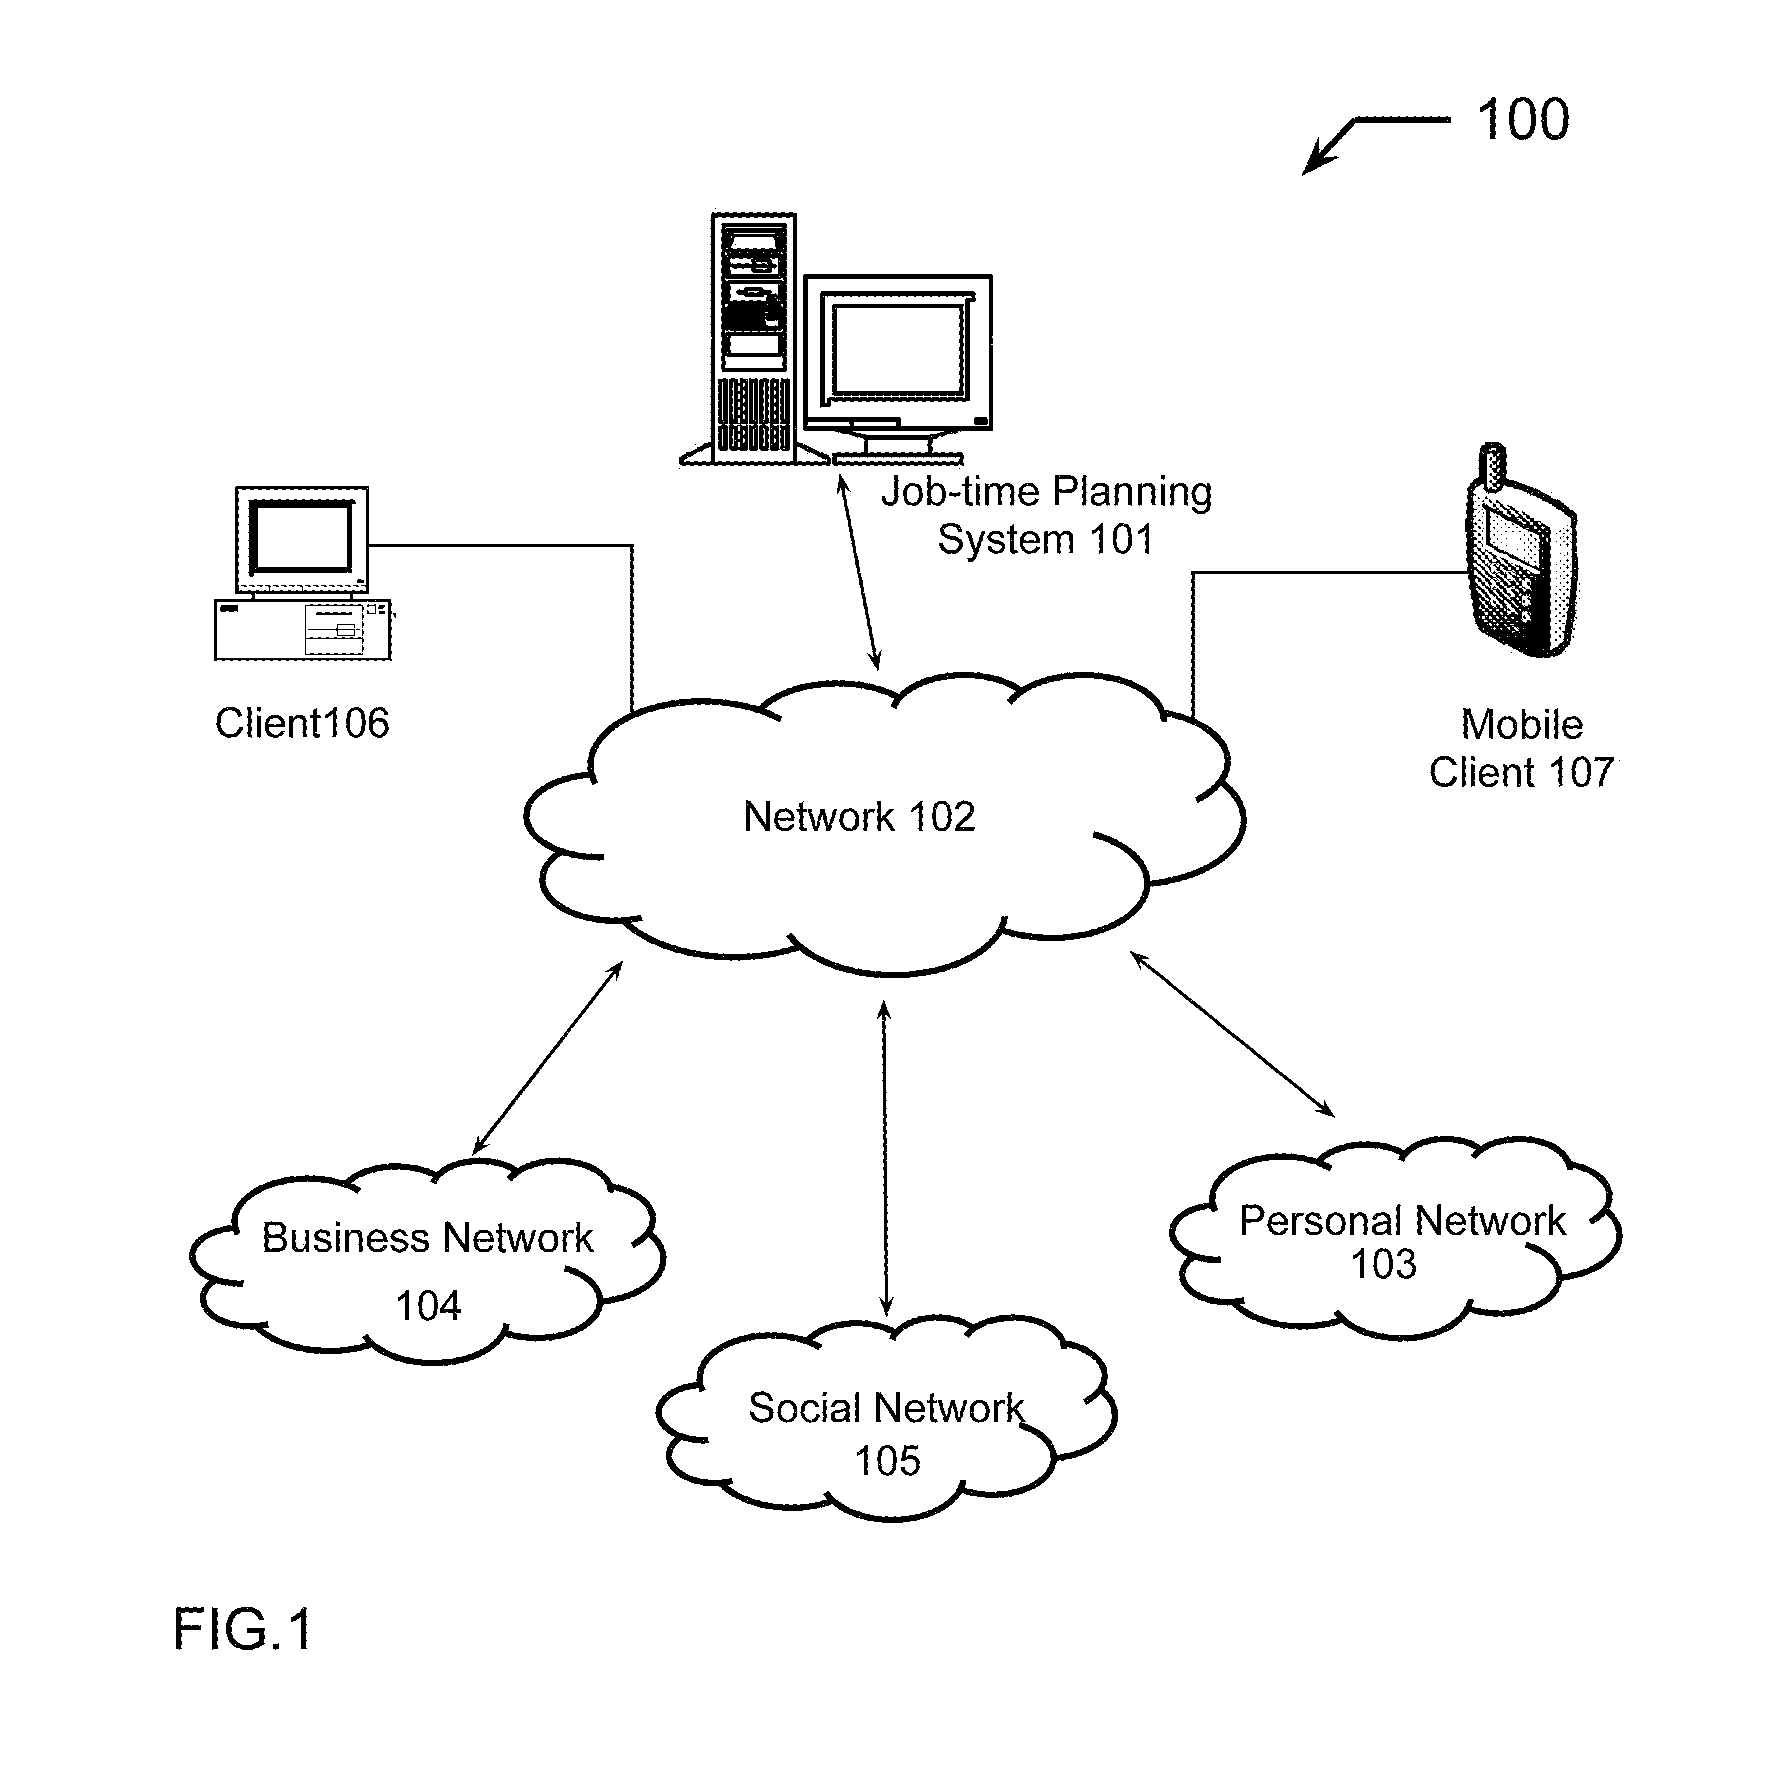 System and method for provising advanced job-time planning and search services for employment services